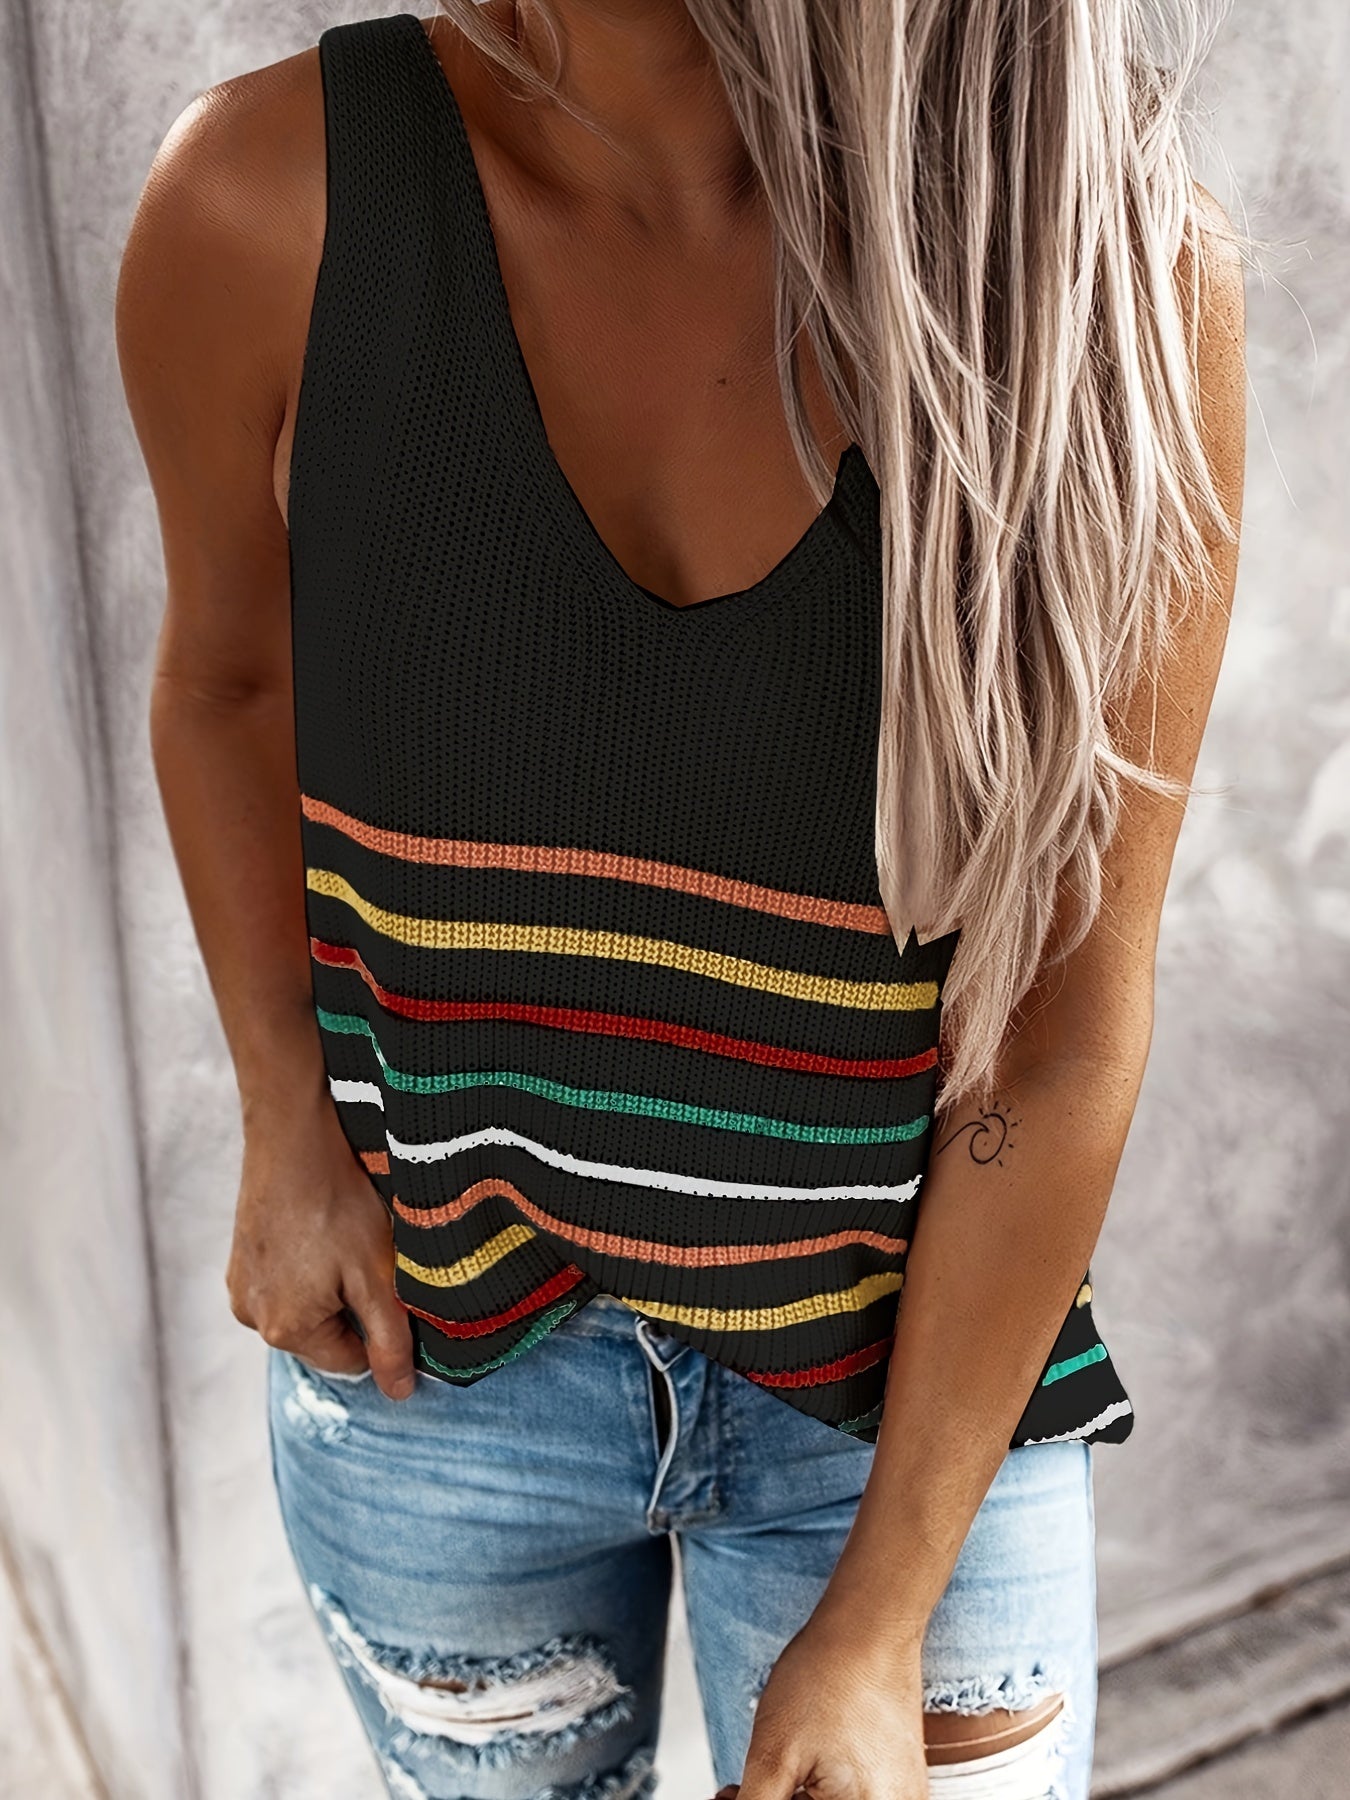 Antmvs Striped Print Knit Top, Vacation V Neck Summer Sleeveless Top, Women's Clothing